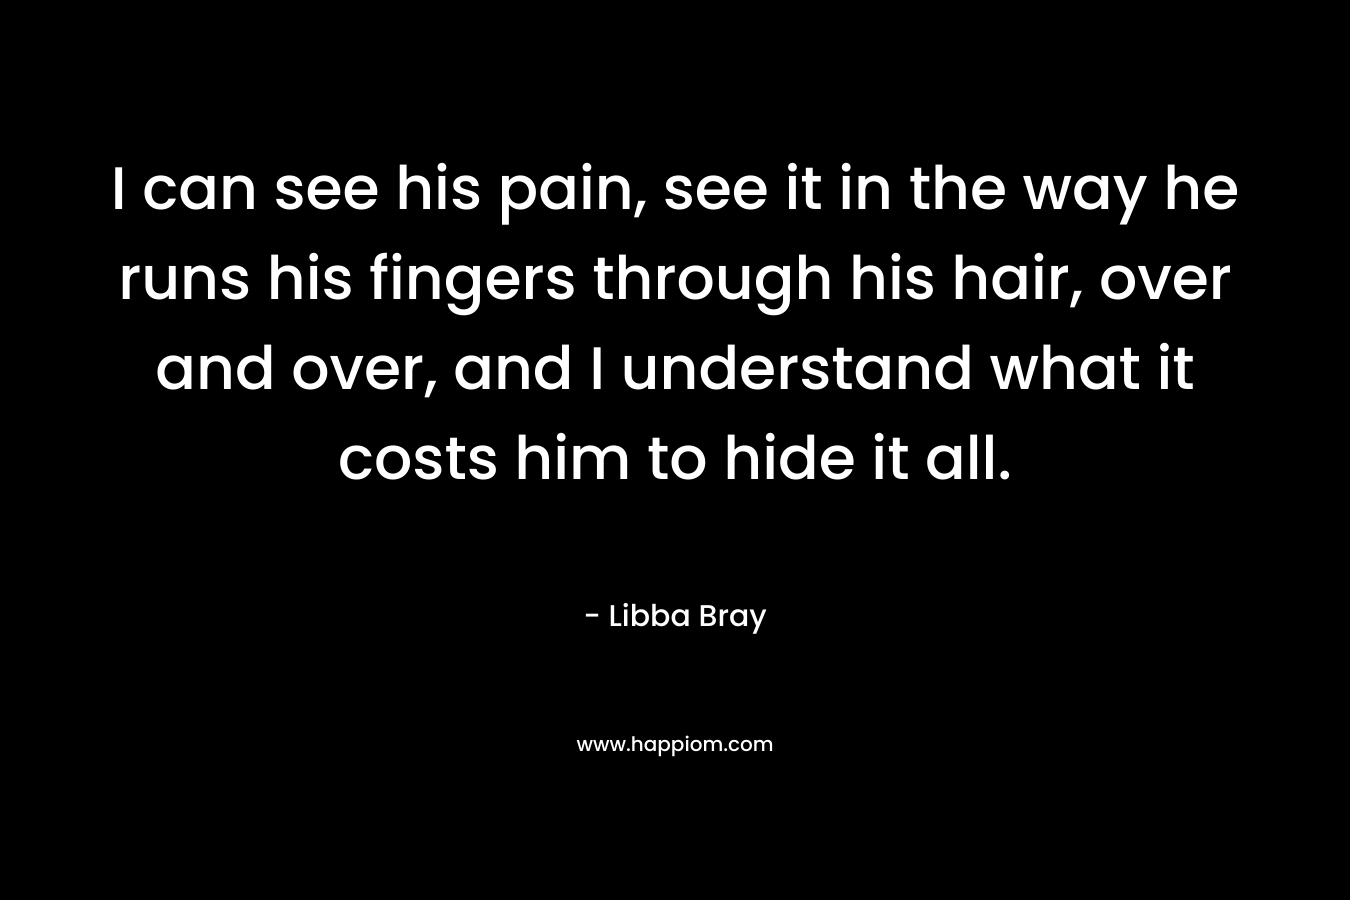 I can see his pain, see it in the way he runs his fingers through his hair, over and over, and I understand what it costs him to hide it all.